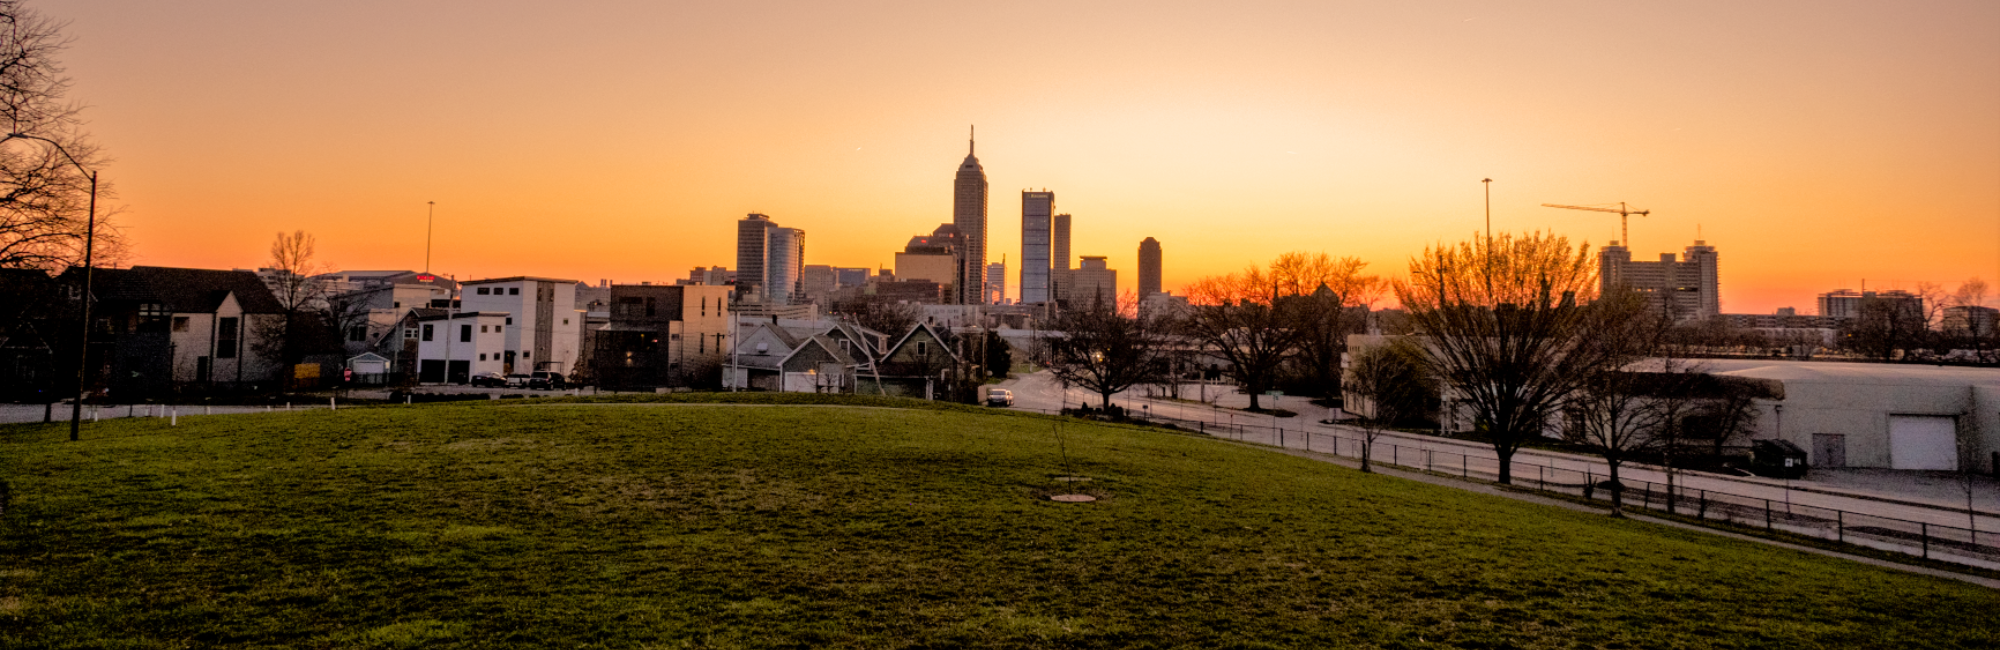 Park that overlooks the downtown Indianapolis skyline at sunset